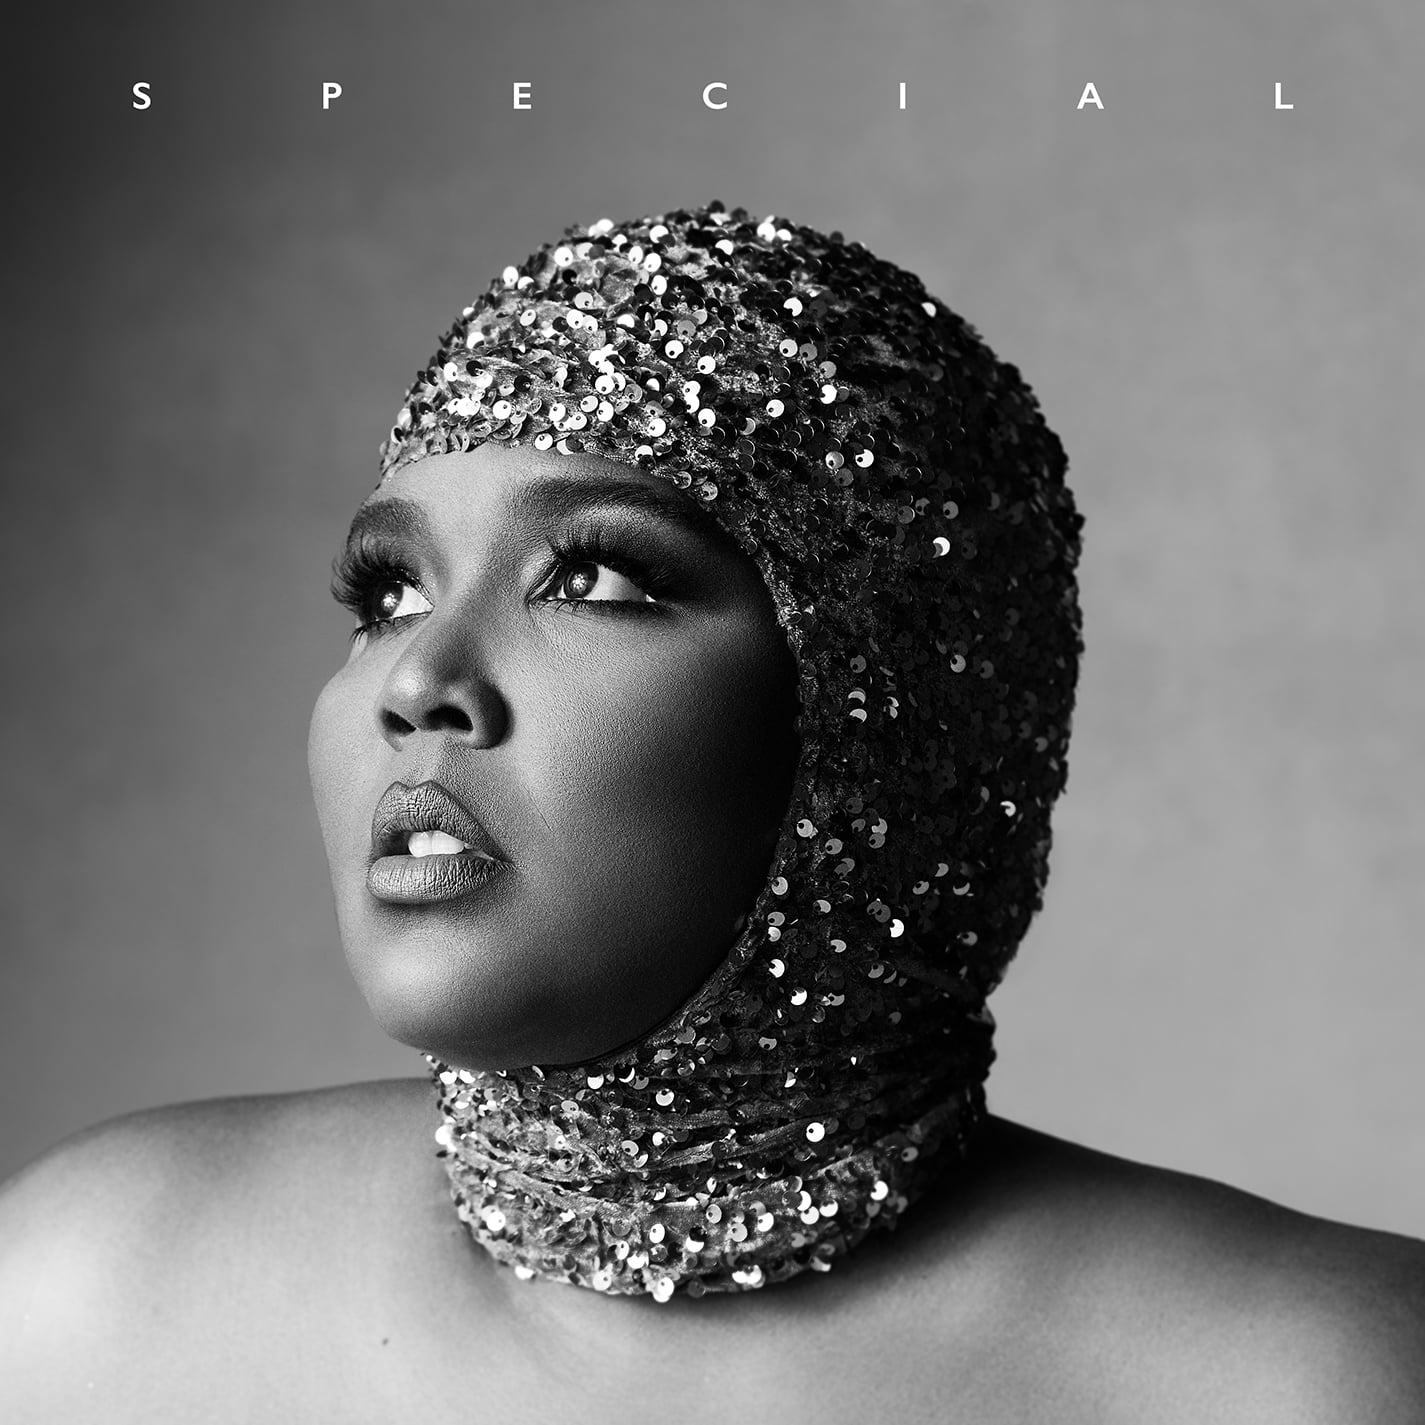 Image of Lizzo's new Album Cover titled "Special"